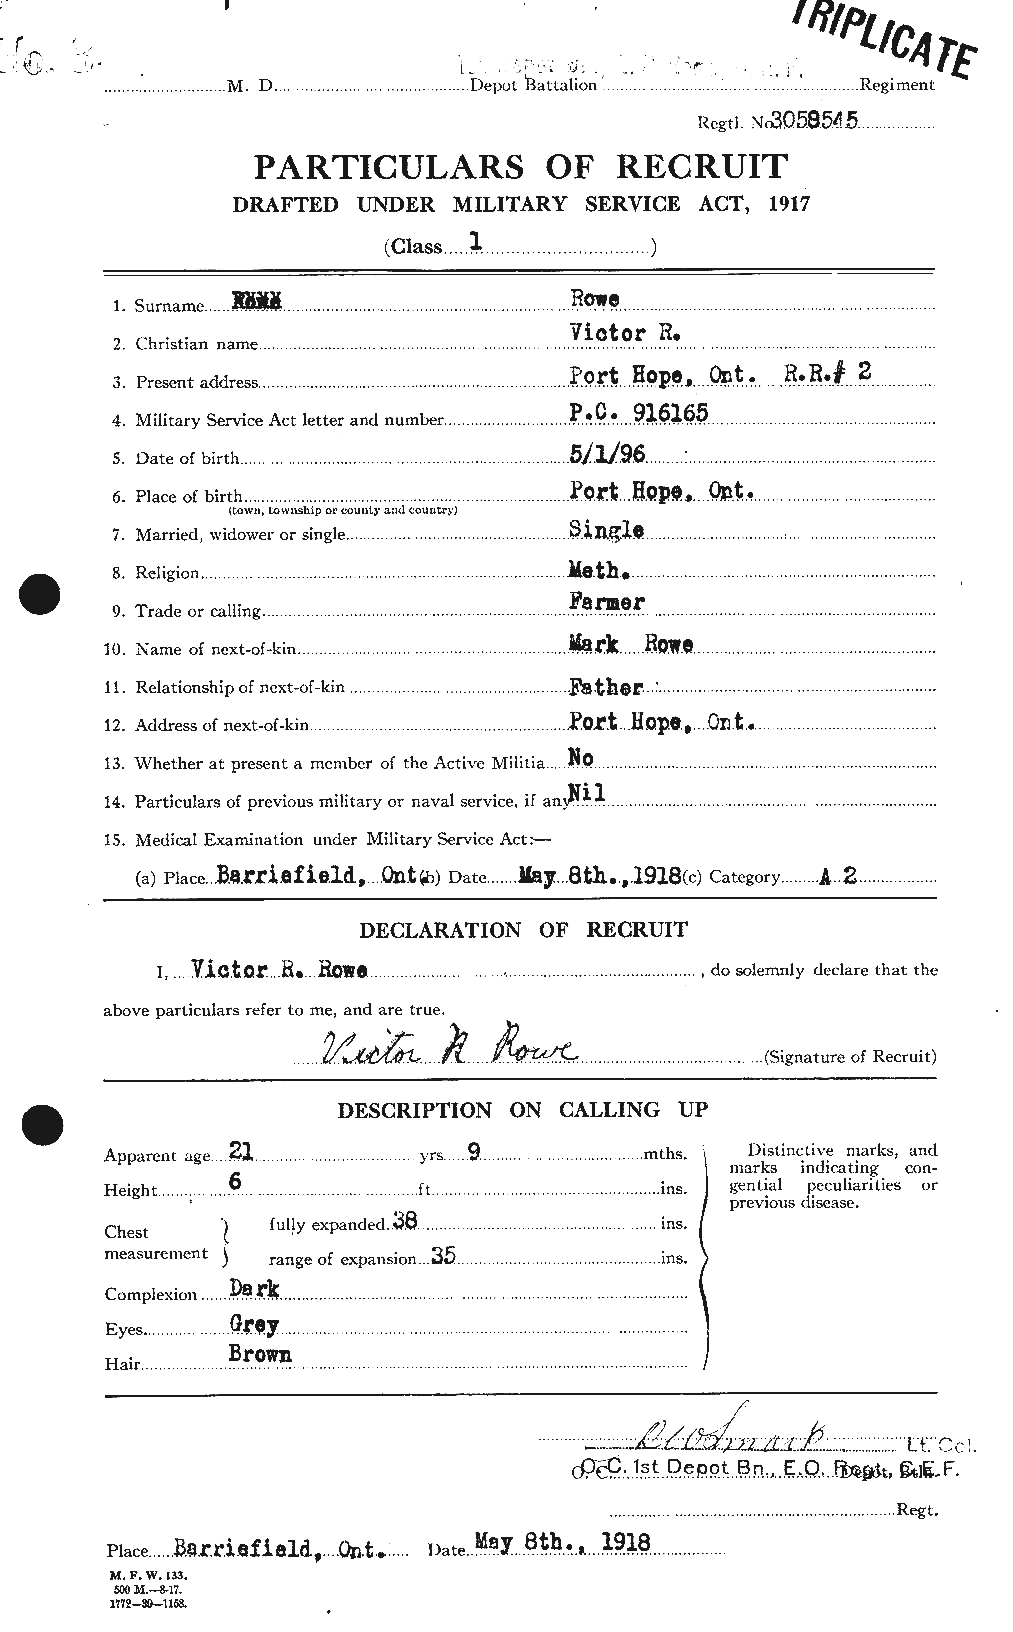 Personnel Records of the First World War - CEF 616009a